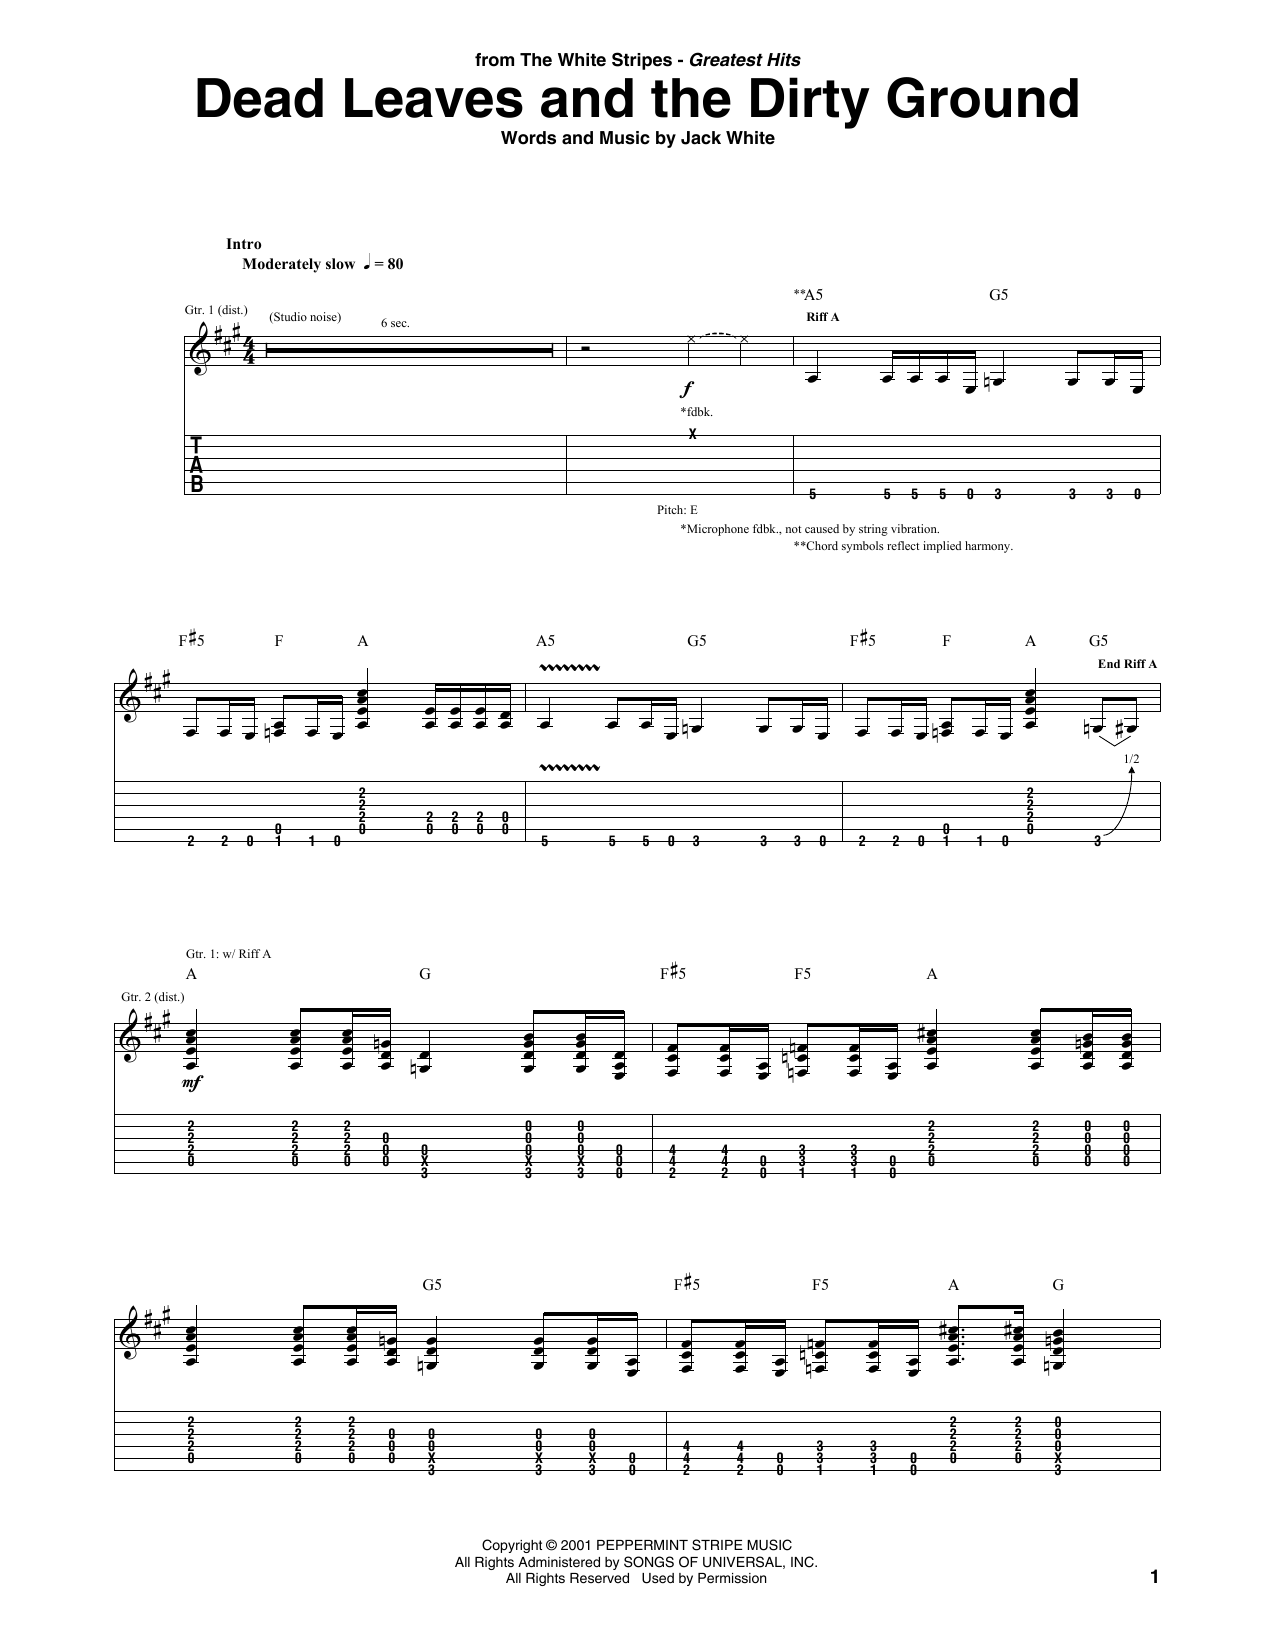 Download The White Stripes Dead Leaves And The Dirty Ground Sheet Music